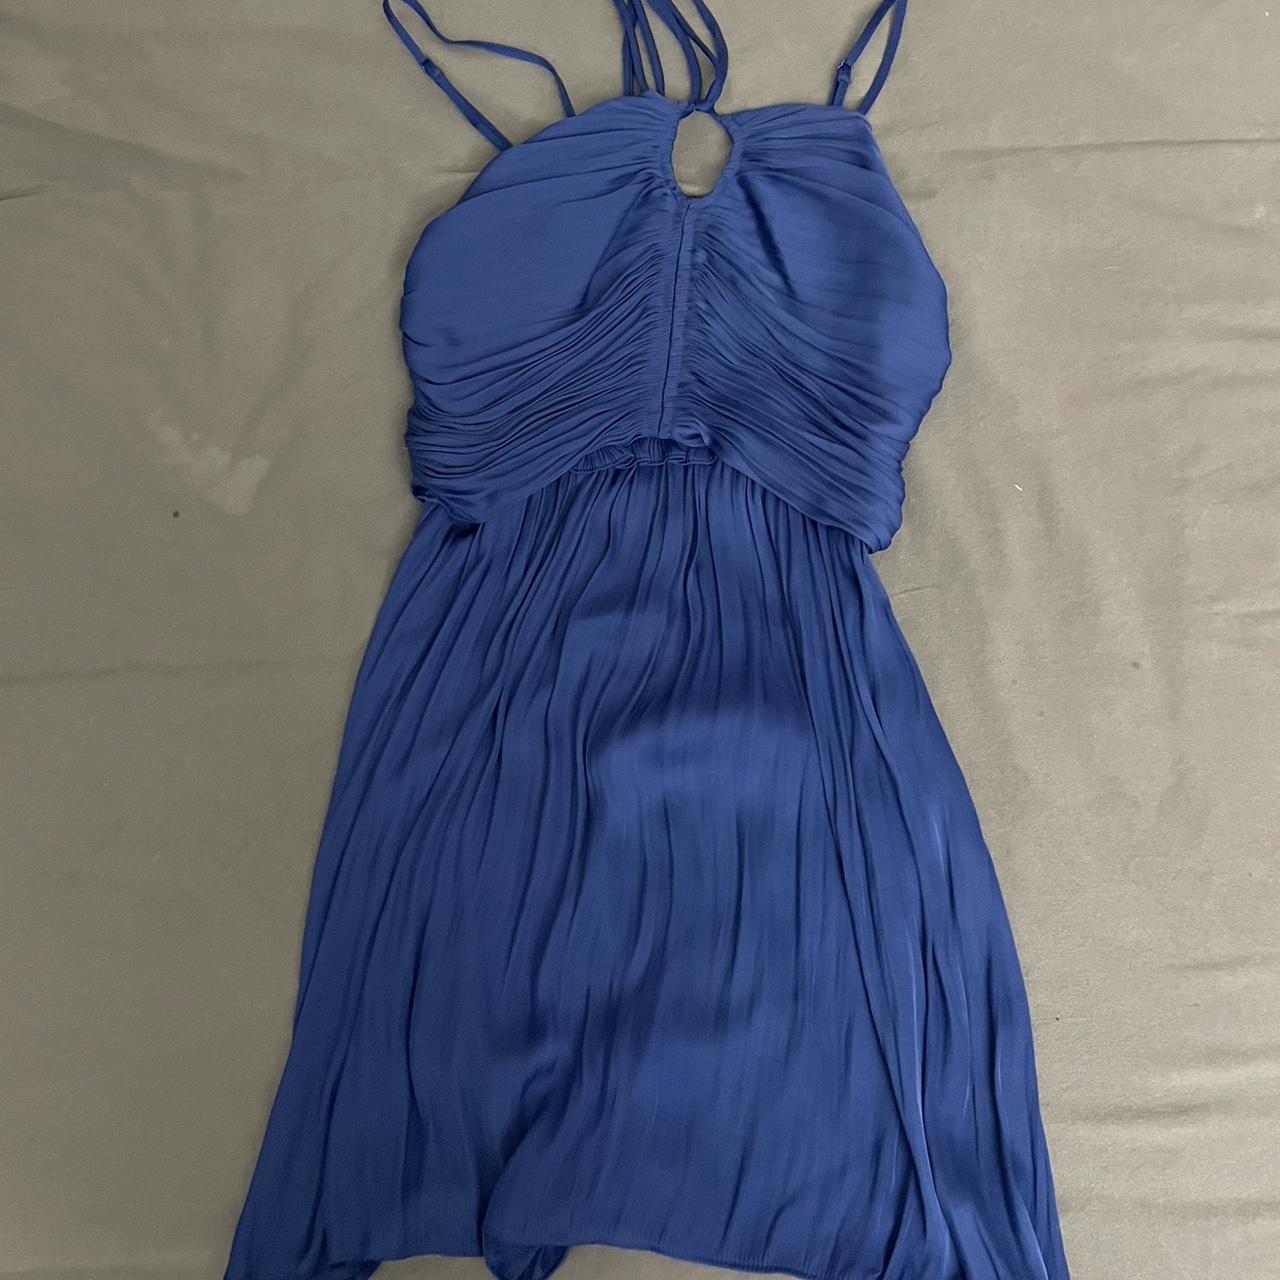 House of harlow blue dress!! never worn before in... - Depop